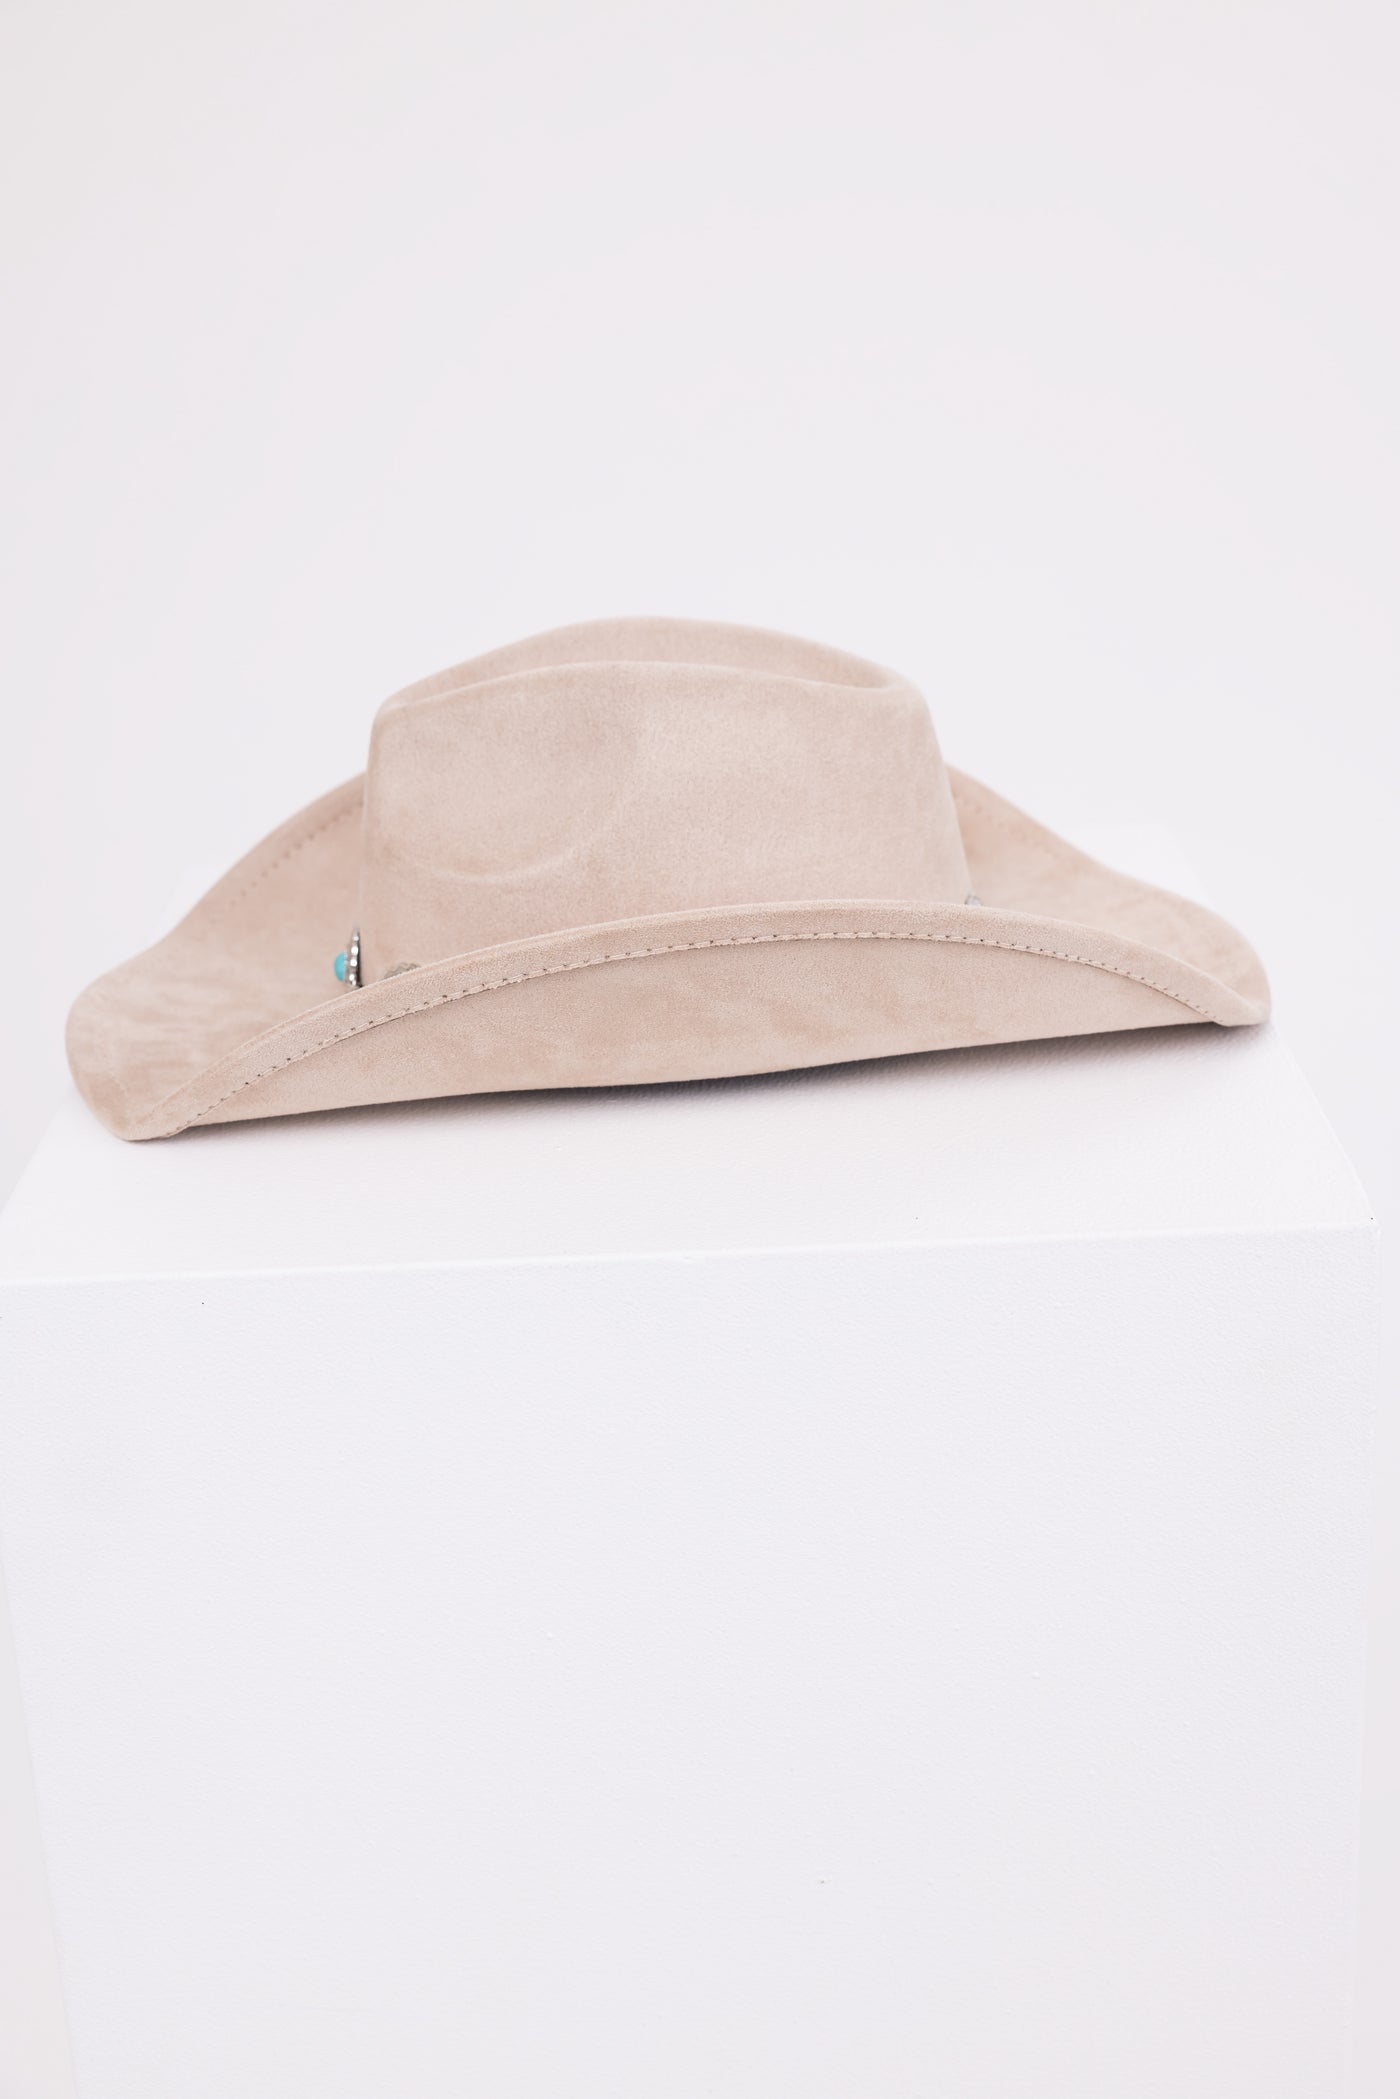 Light Taupe Suede Hat with Silver Chain